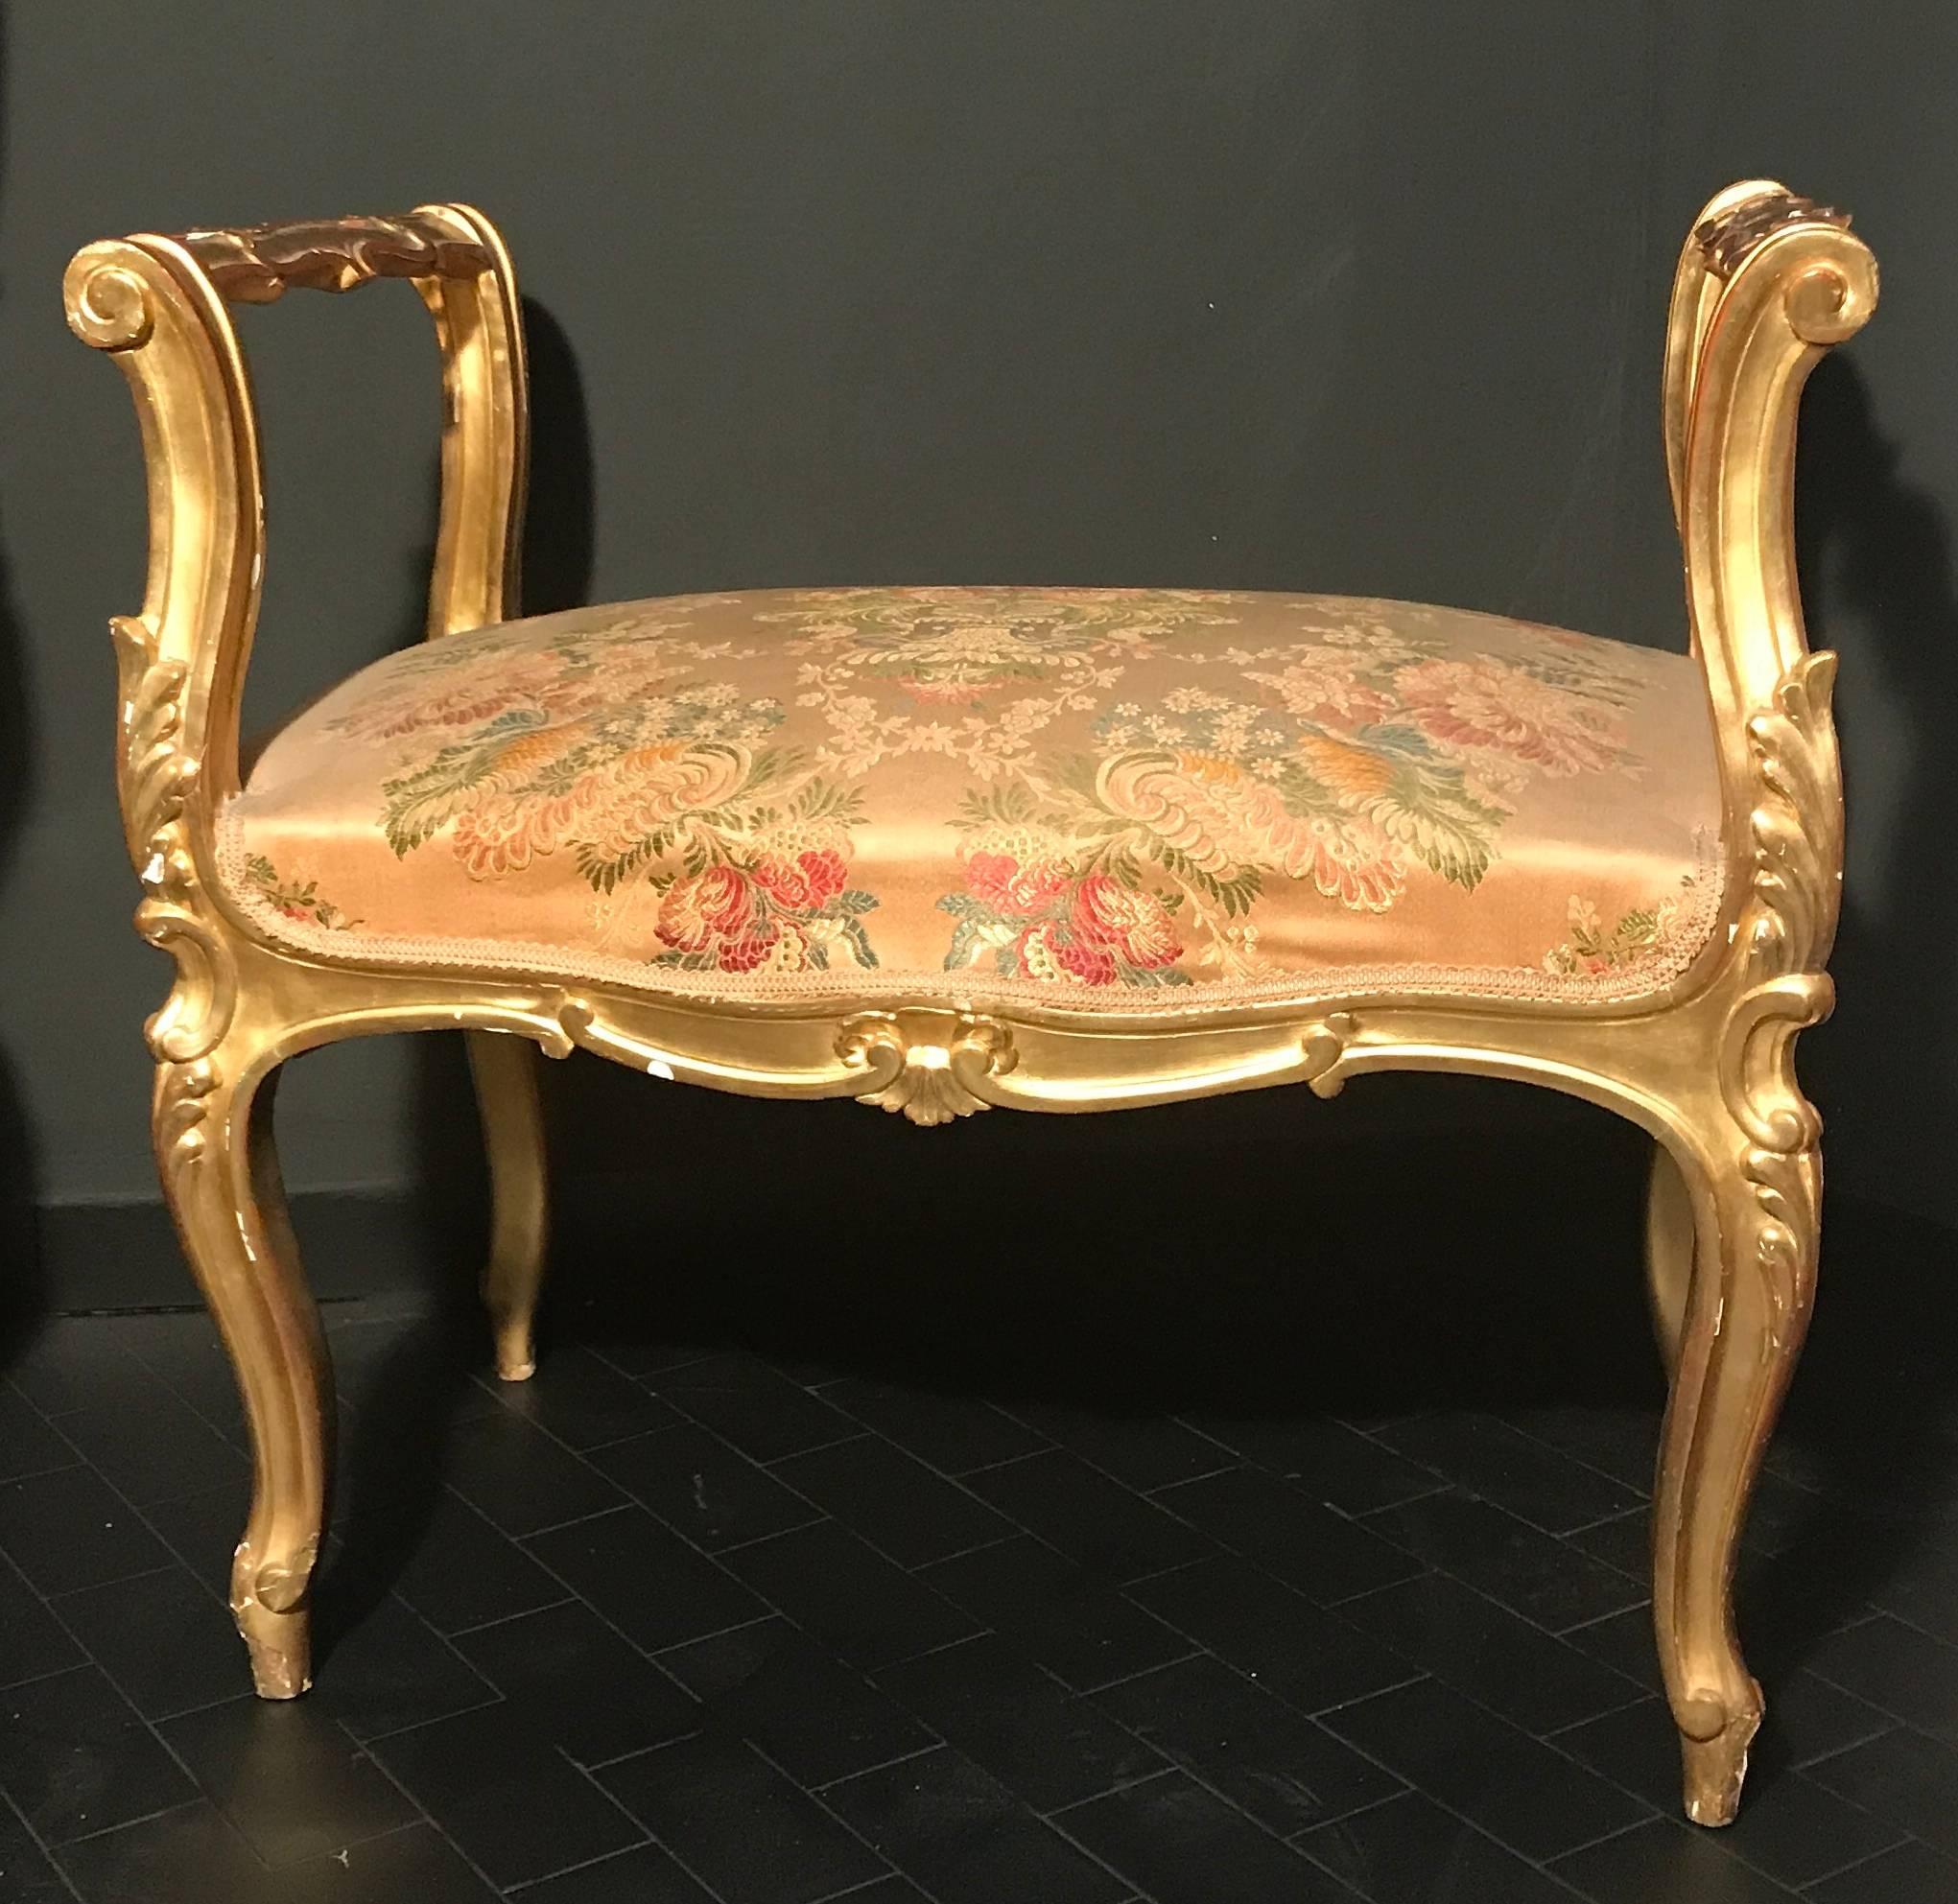 Extraordinary Italian Eleven Piece Gilt Salon Living Room Suite, 19th Century In Good Condition For Sale In Rome, IT